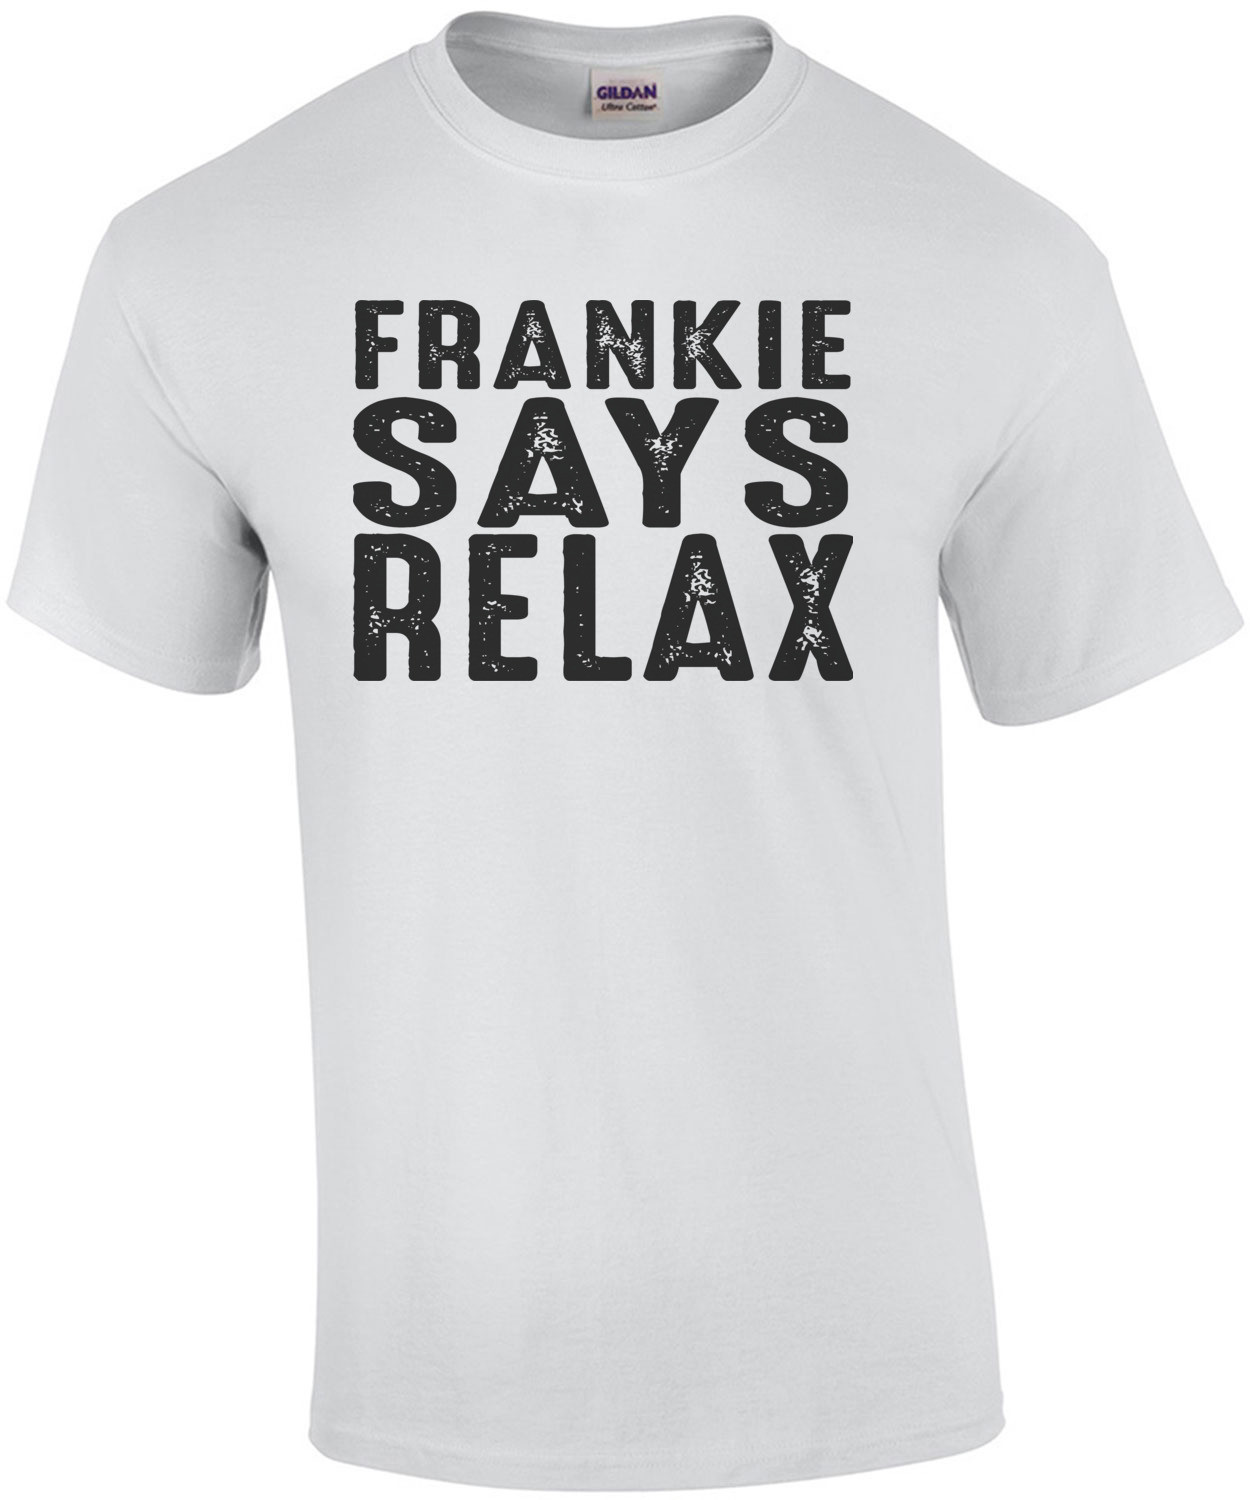 Frankie says relax - Frankie Goes to Hollywood T-Shirt